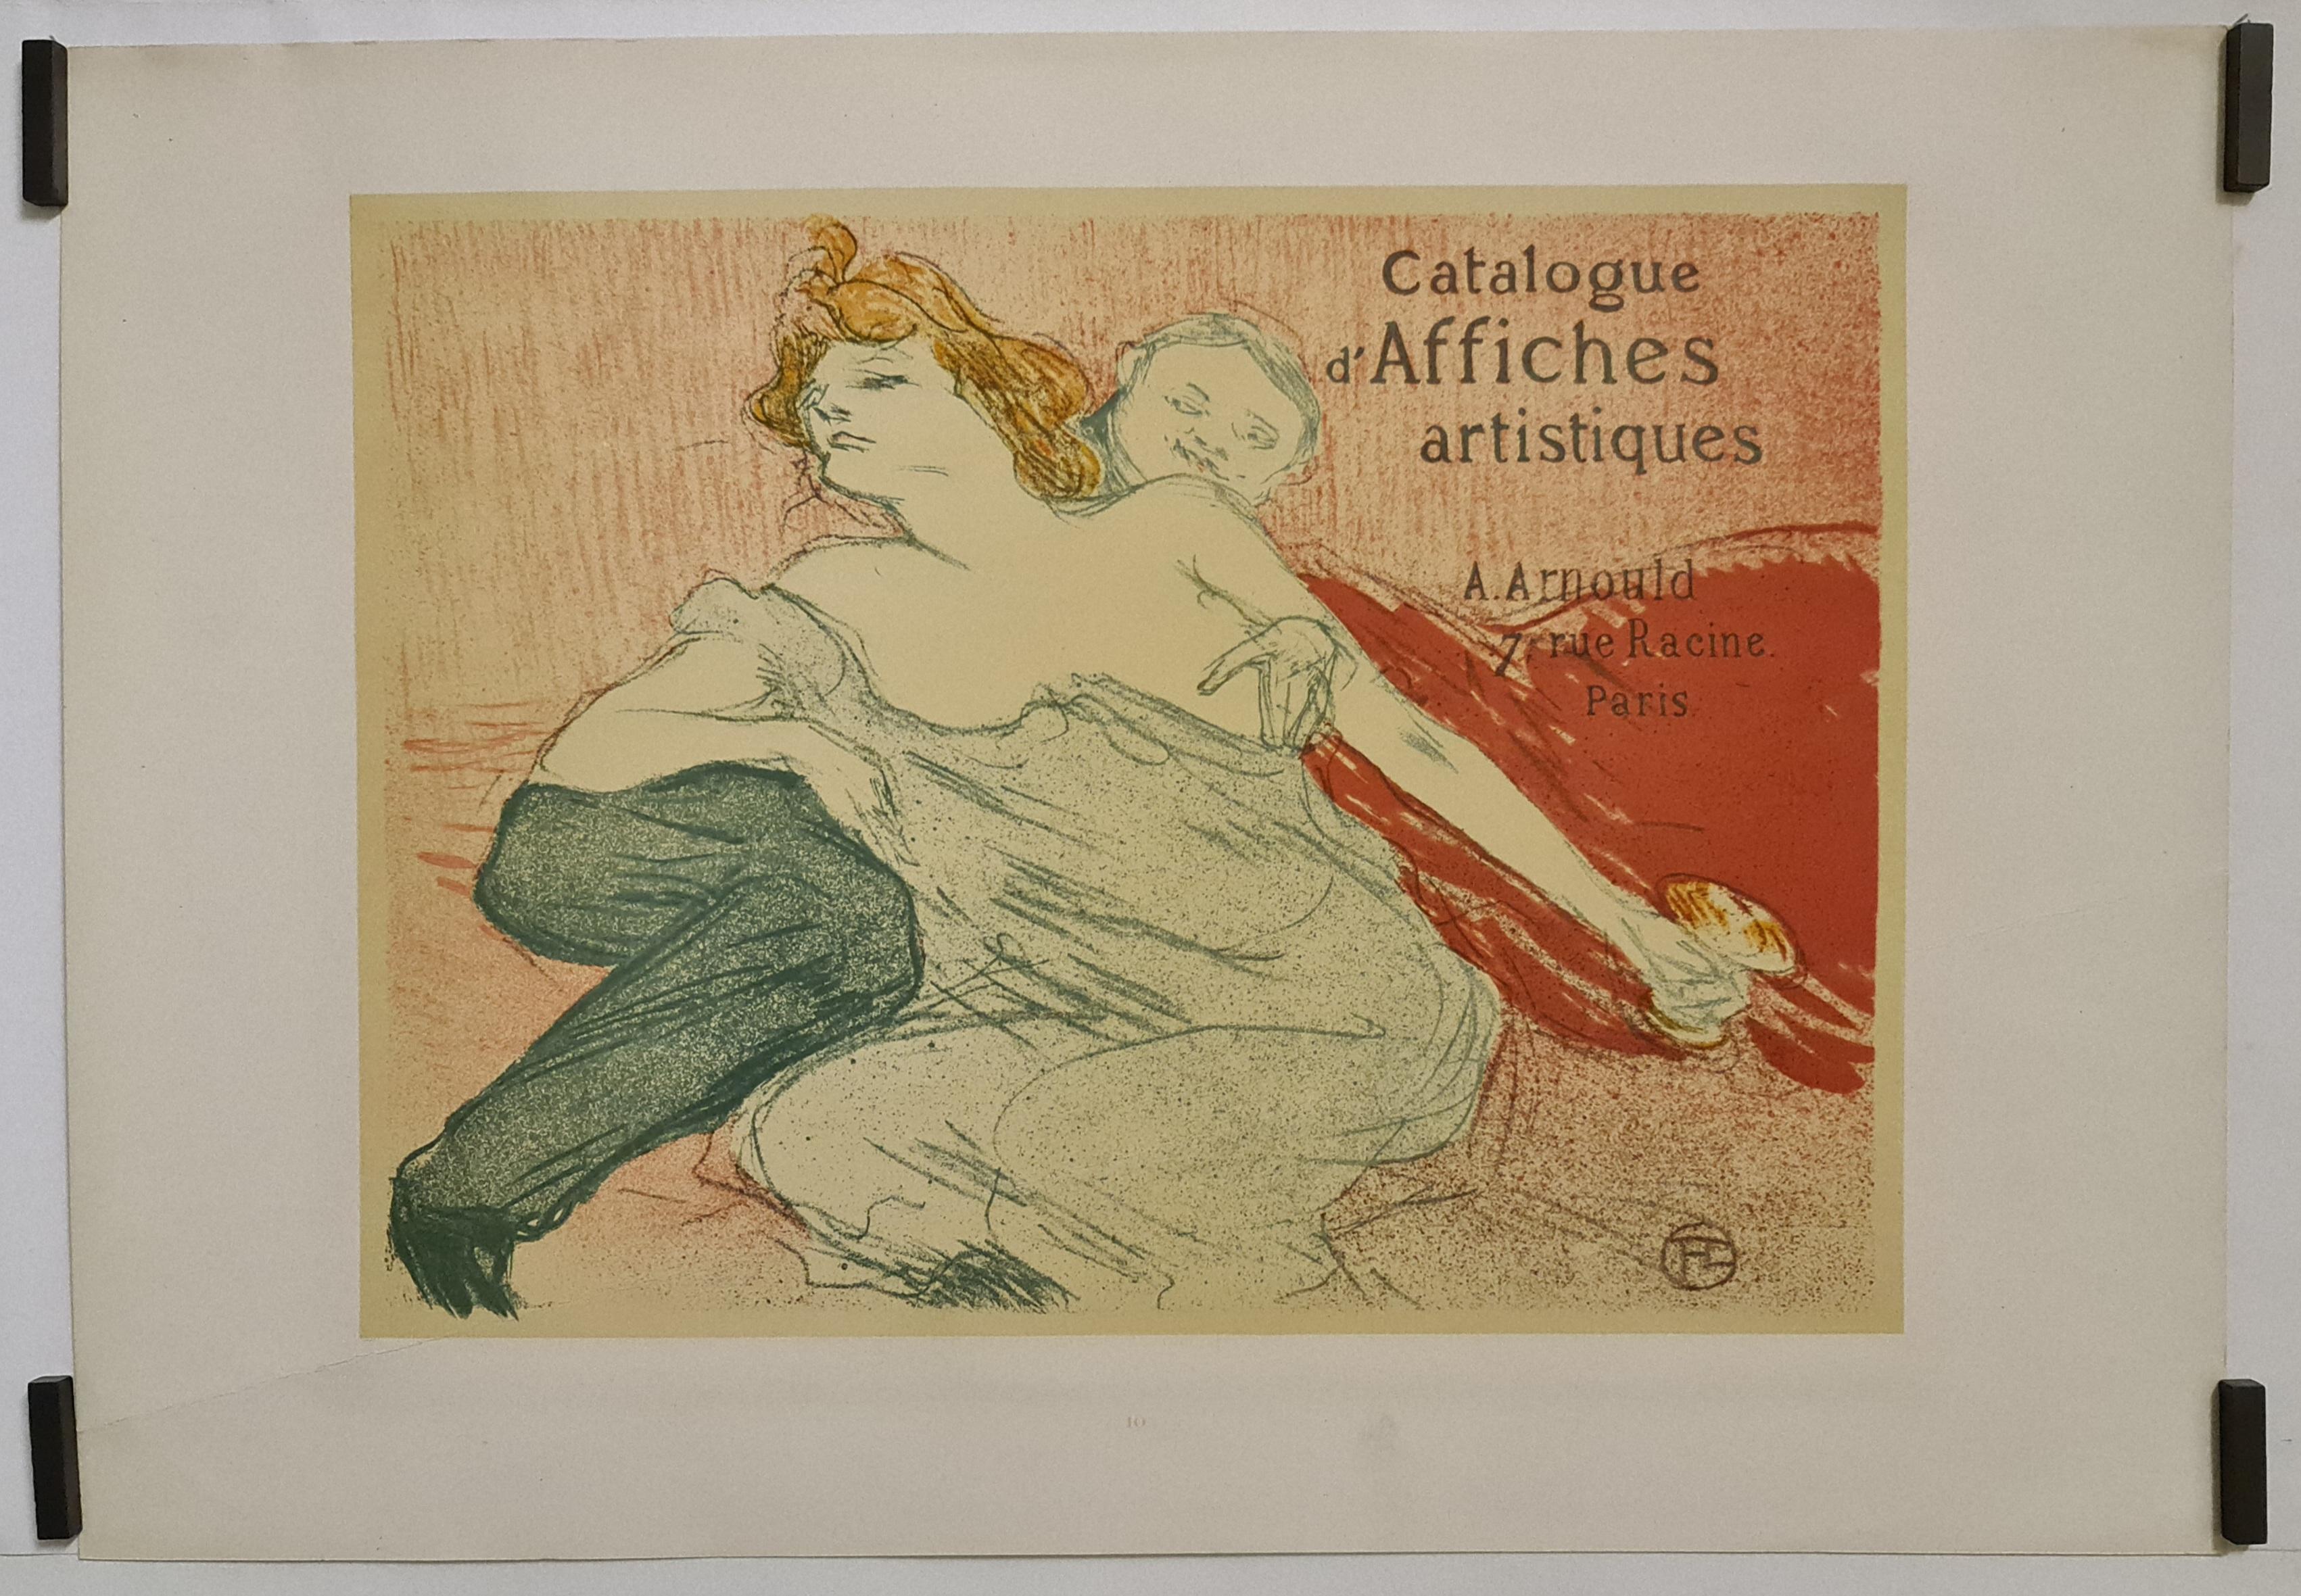 Beautiful poster by Henri de Toulouse-Lautrec in 1896. Created by the same hand that did the Moulin Rouge advertisement, this exceptional poster by Henri de Toulouse-Lautrec demonstrates the artist's remarkable ability to capture moods and